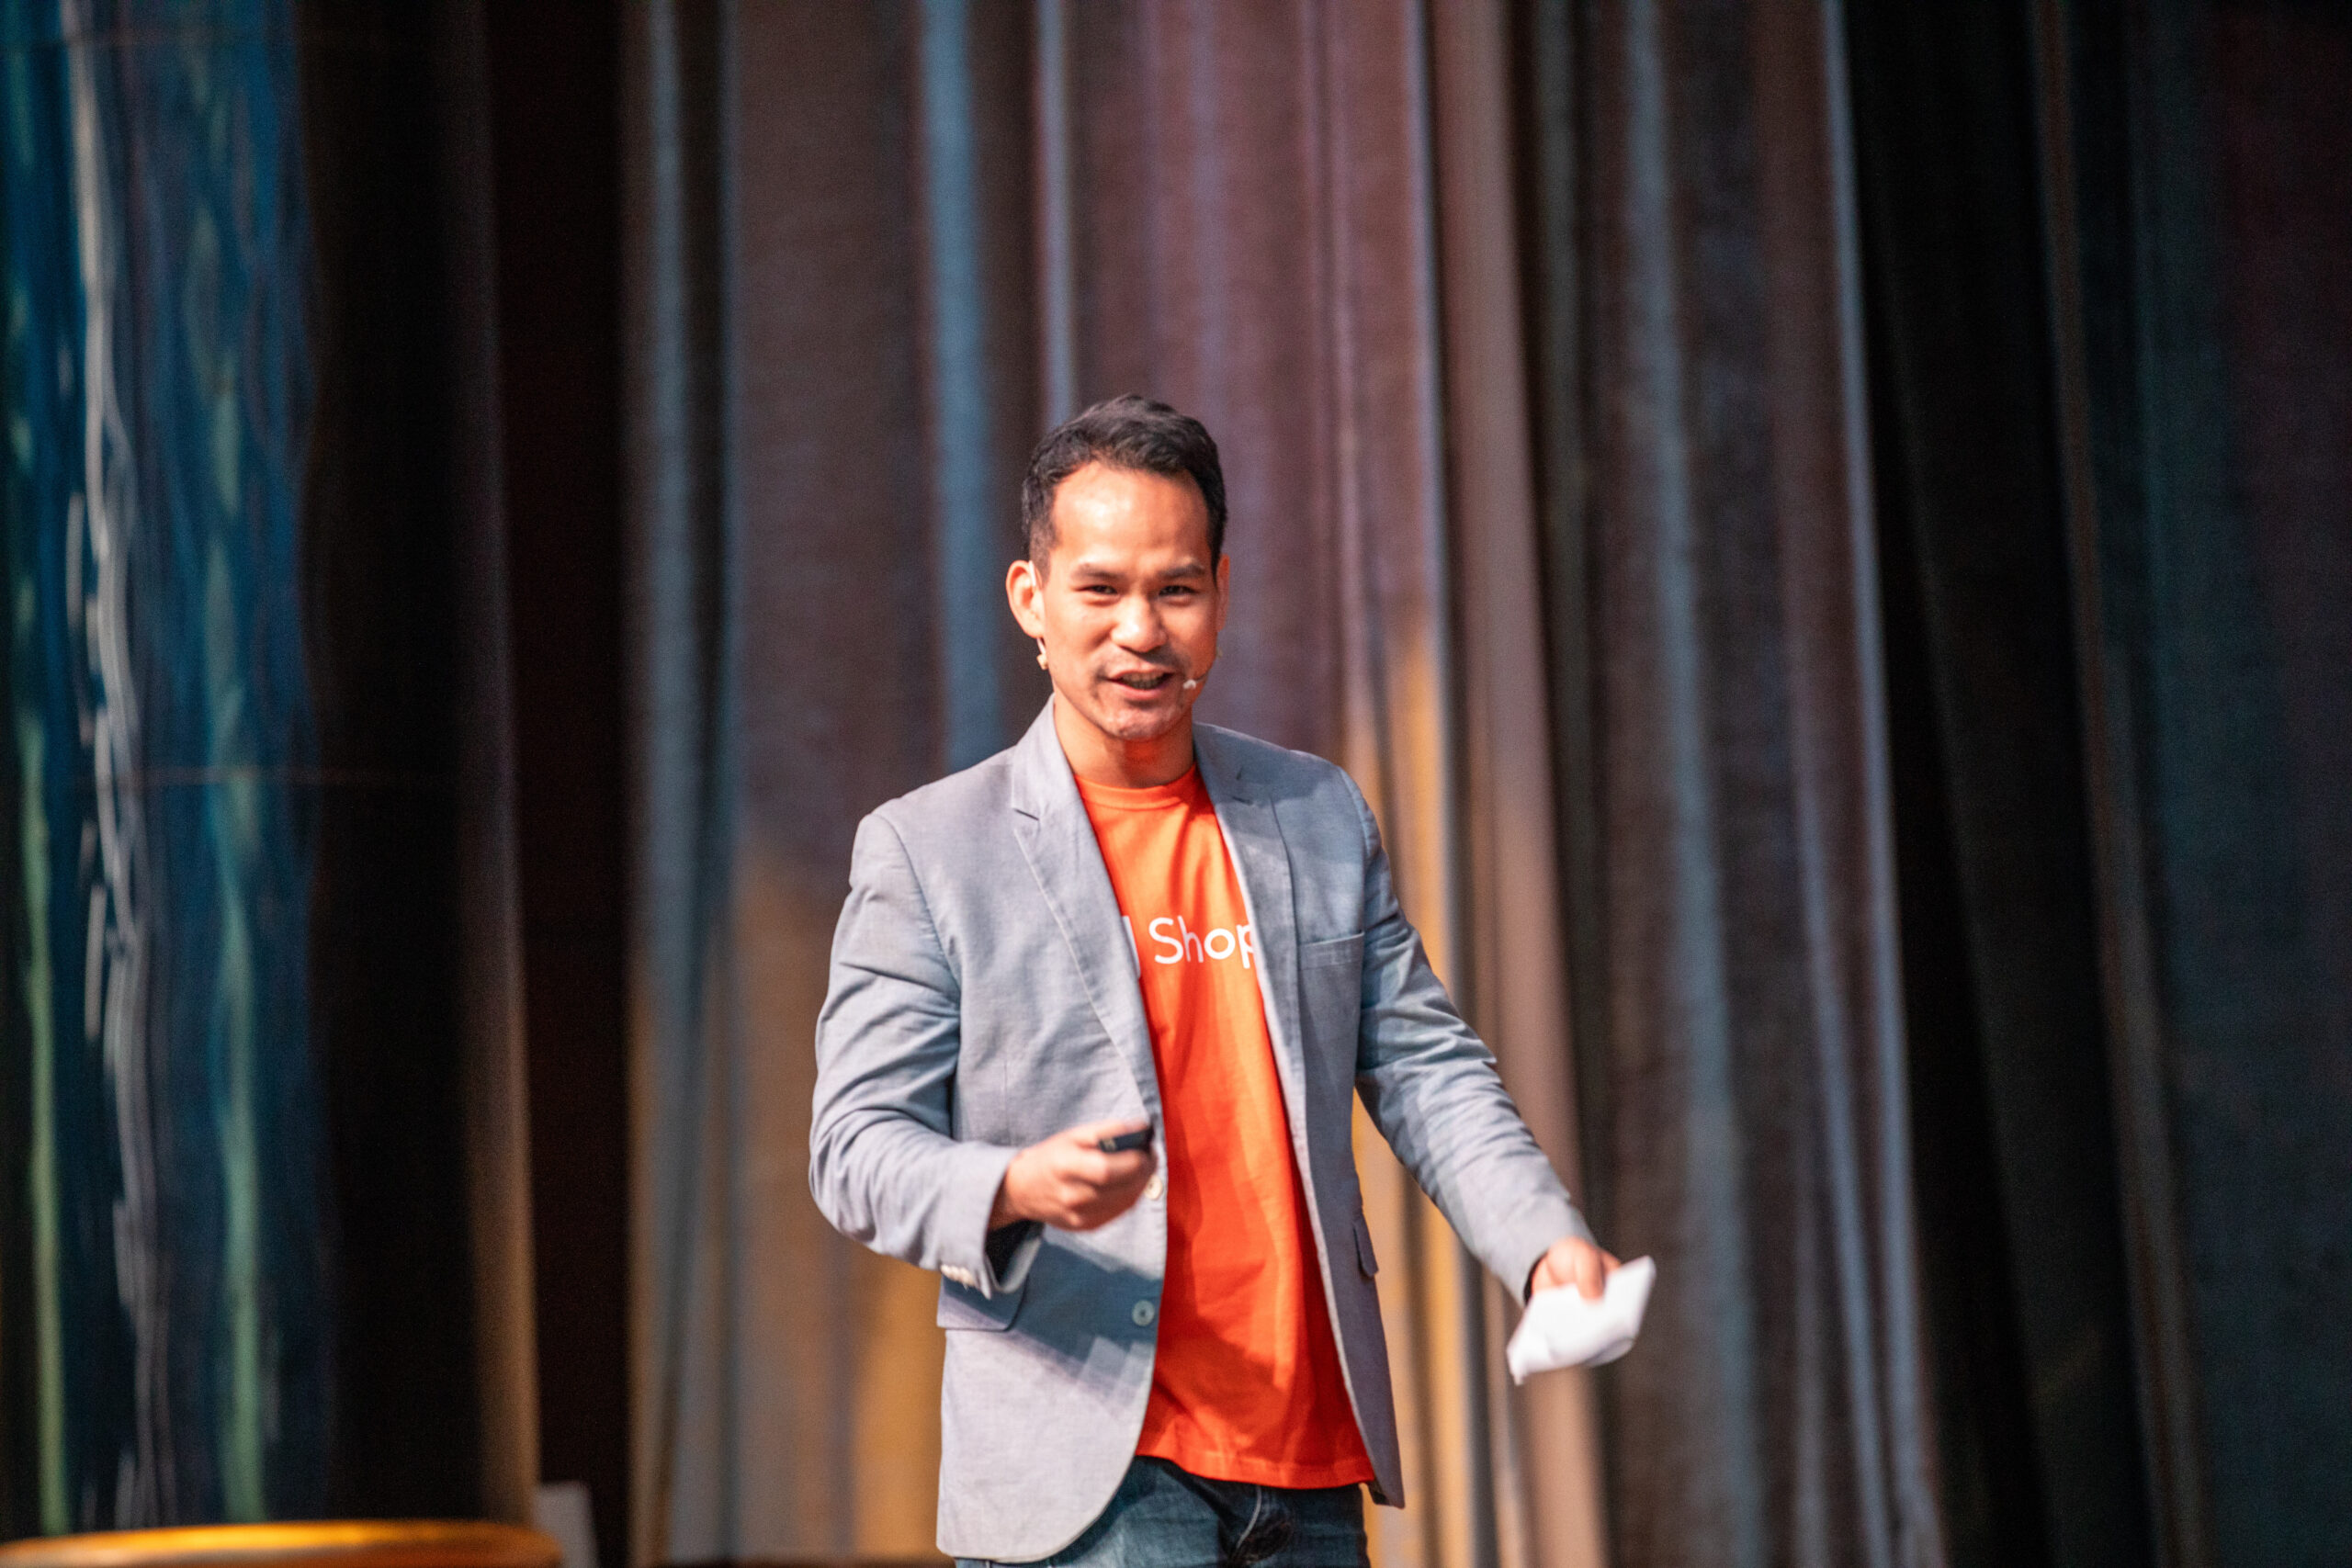 Business Updates by Cheng Xun CX Chua Director of Shopee Malaysia scaled